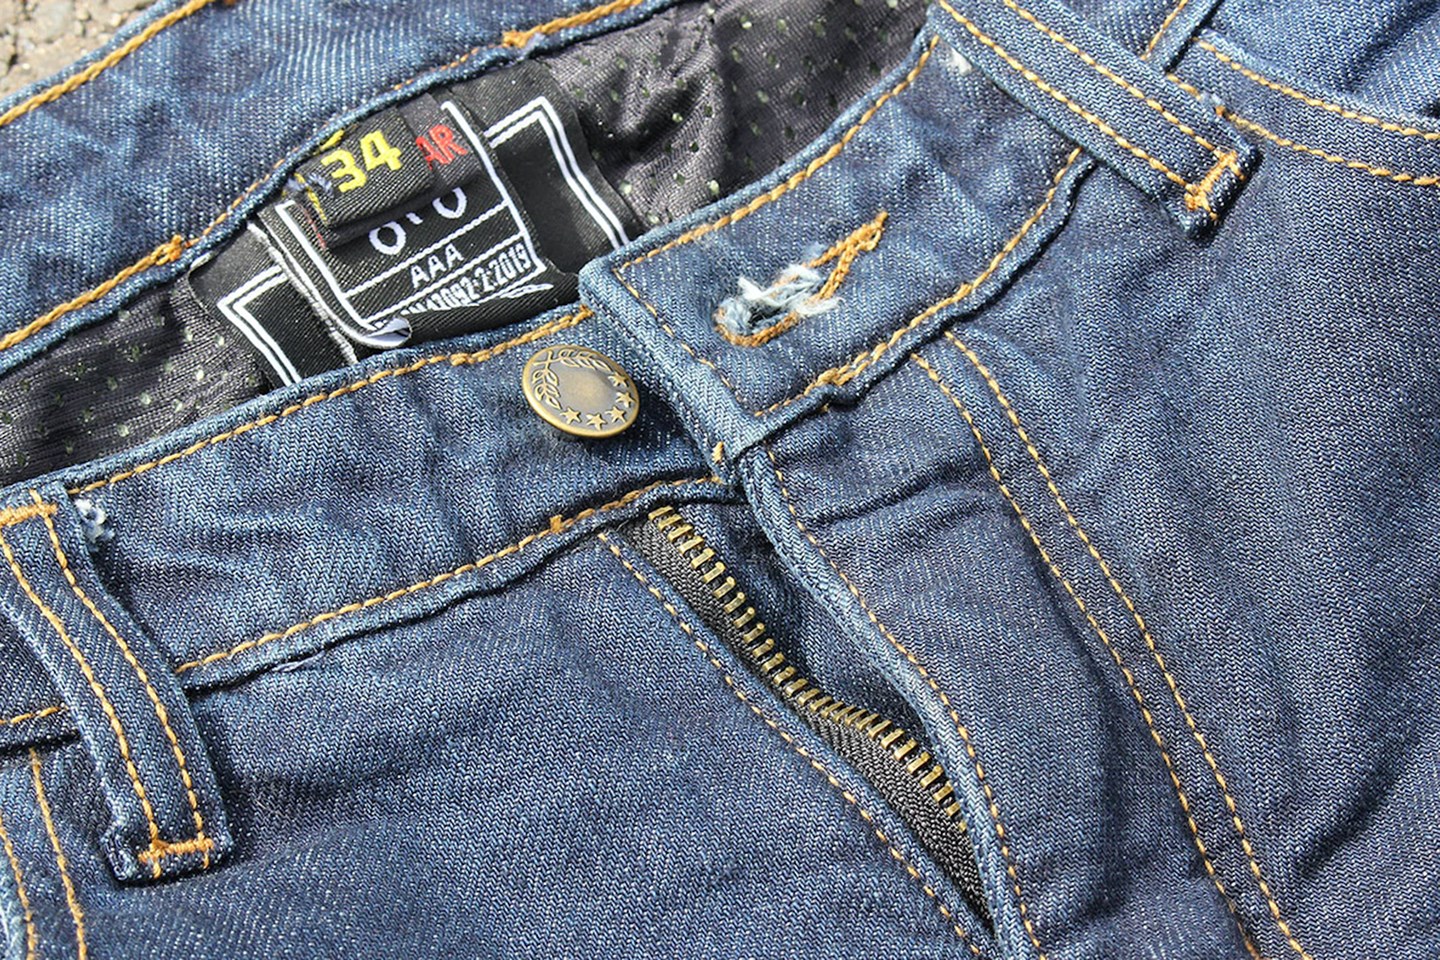 Riding jeans review: Weise Gator tried and tested